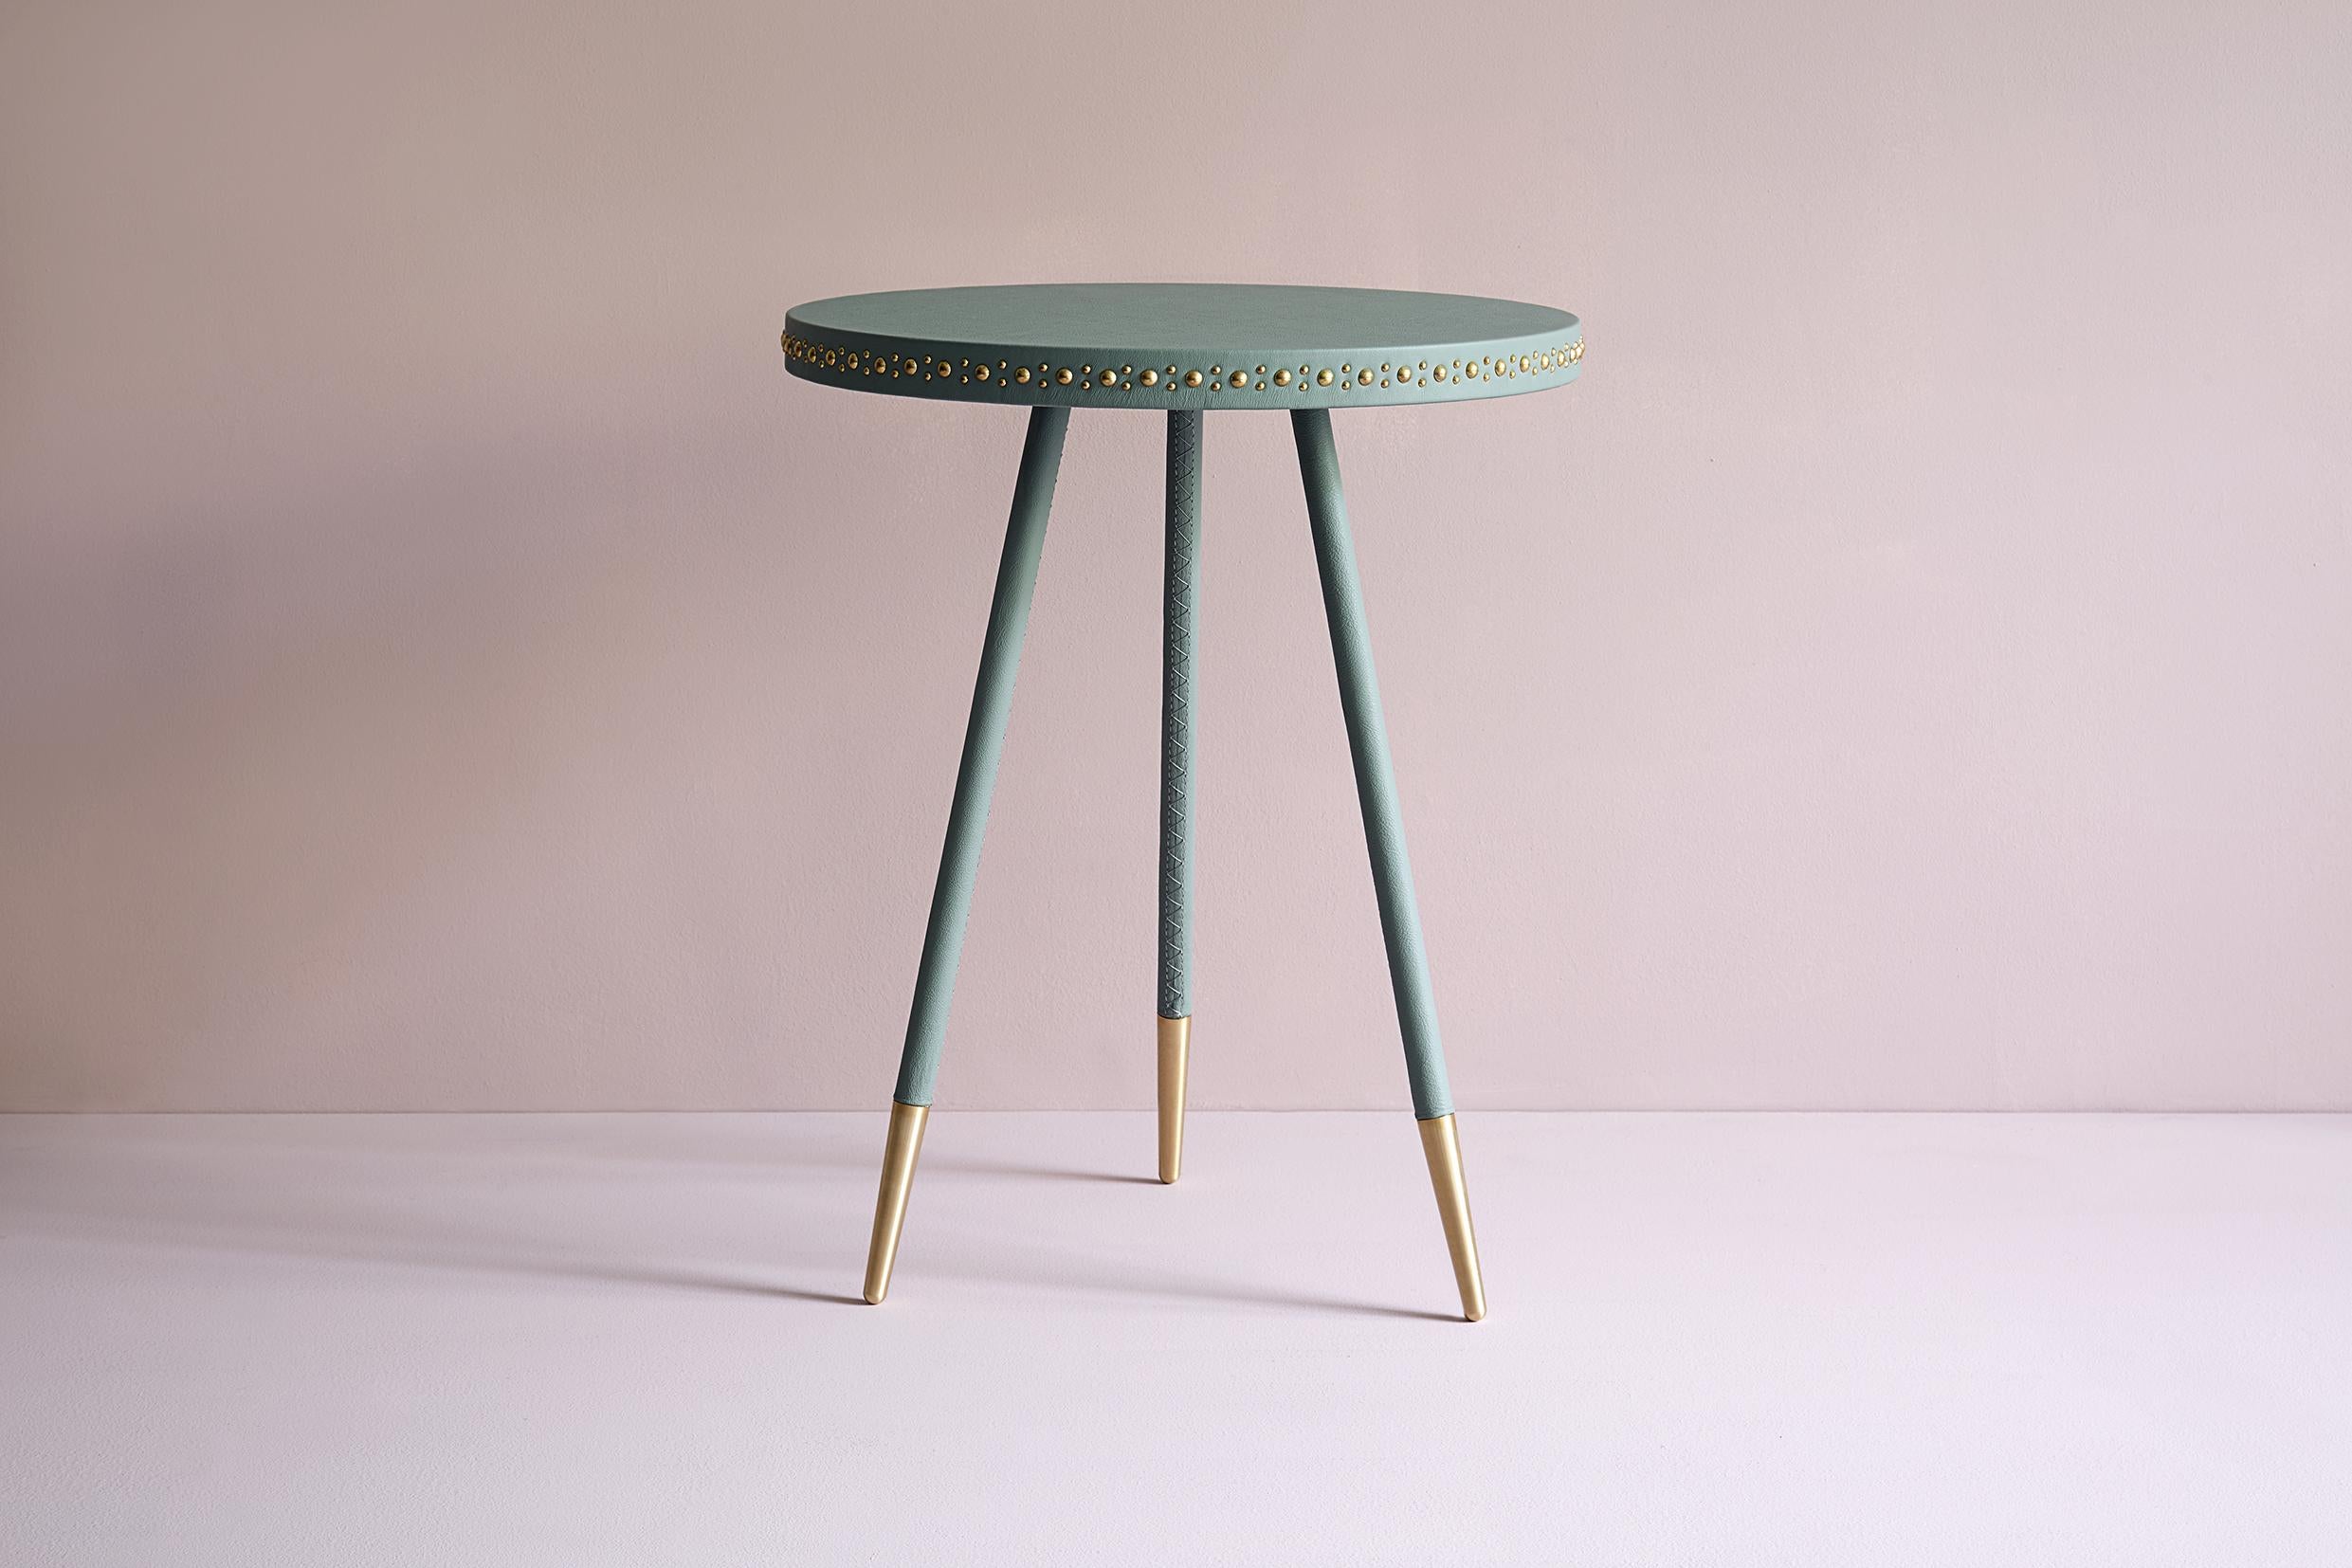 Bethan Gray has taken inspiration from the stud work found on Asian and Arabic doors to develop the aesthetic on her
Stud range of tables. Studding was traditionally used to join two materials together, such as leather or wood, and was
later used